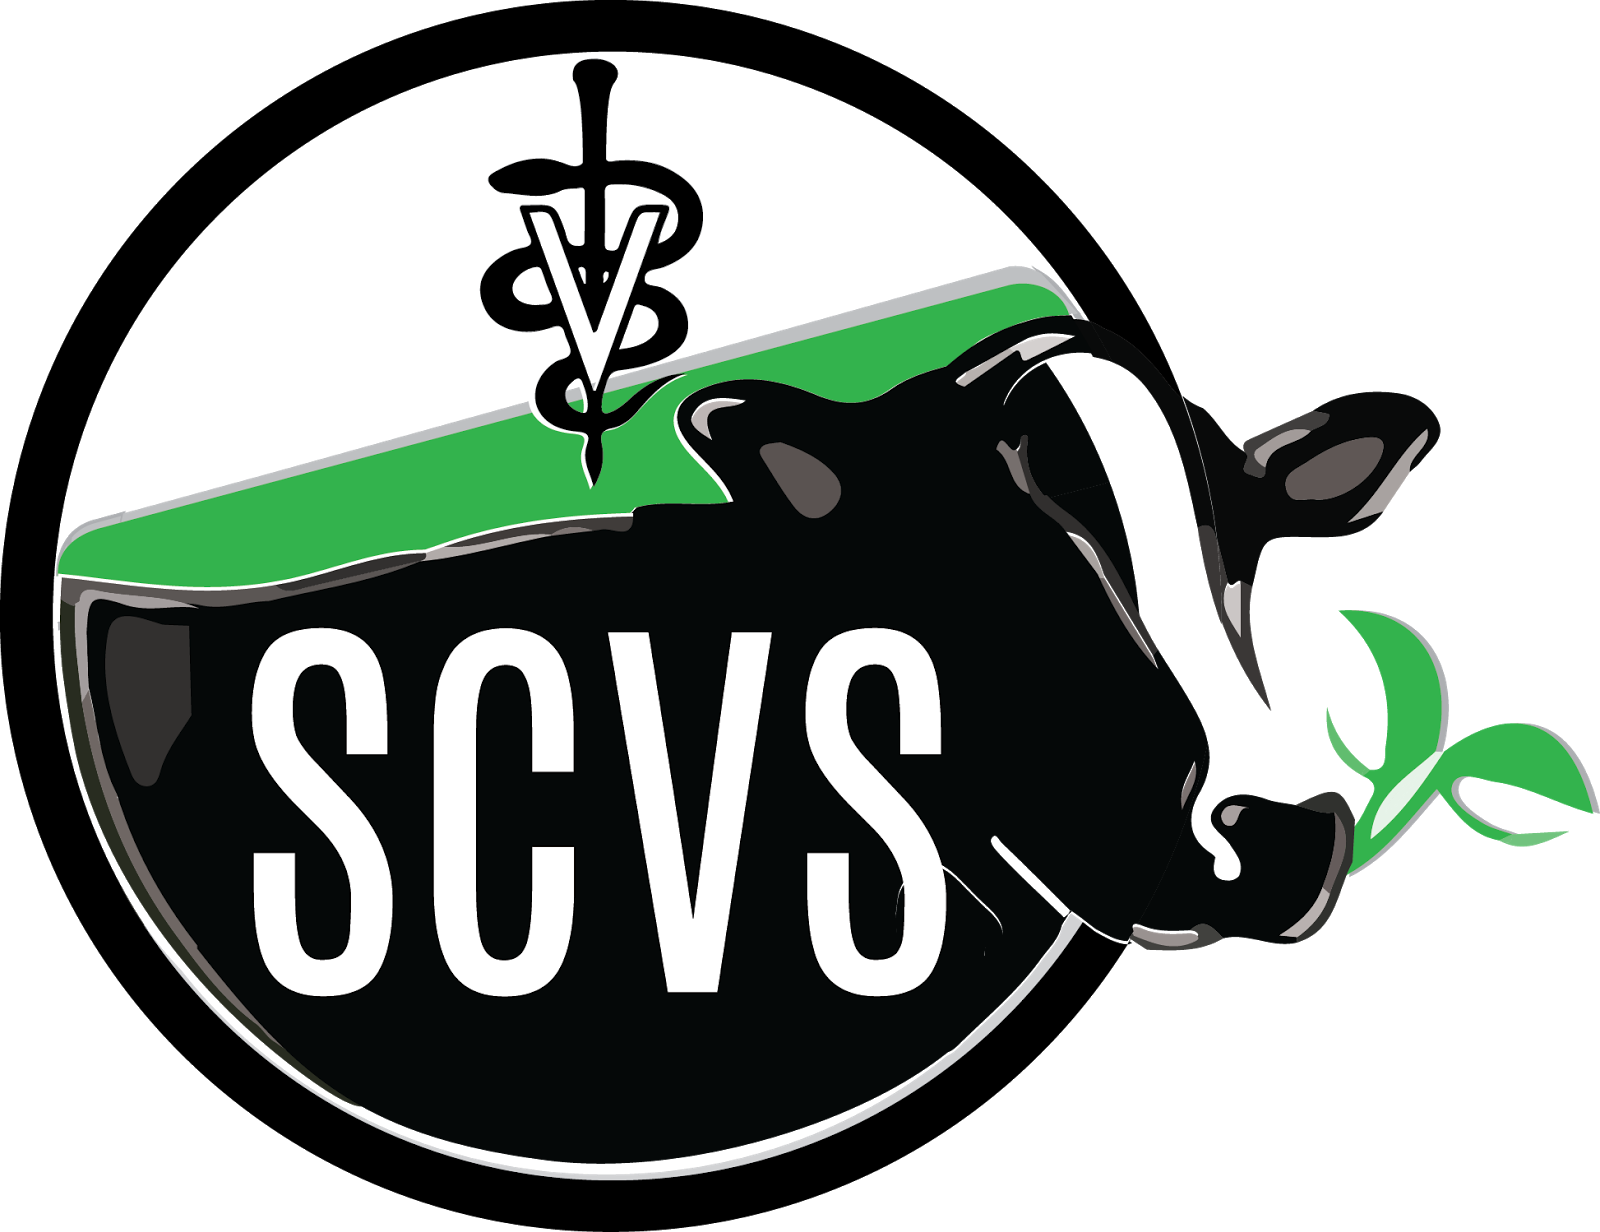 Veterinarian clipart cow. South county veterinary services